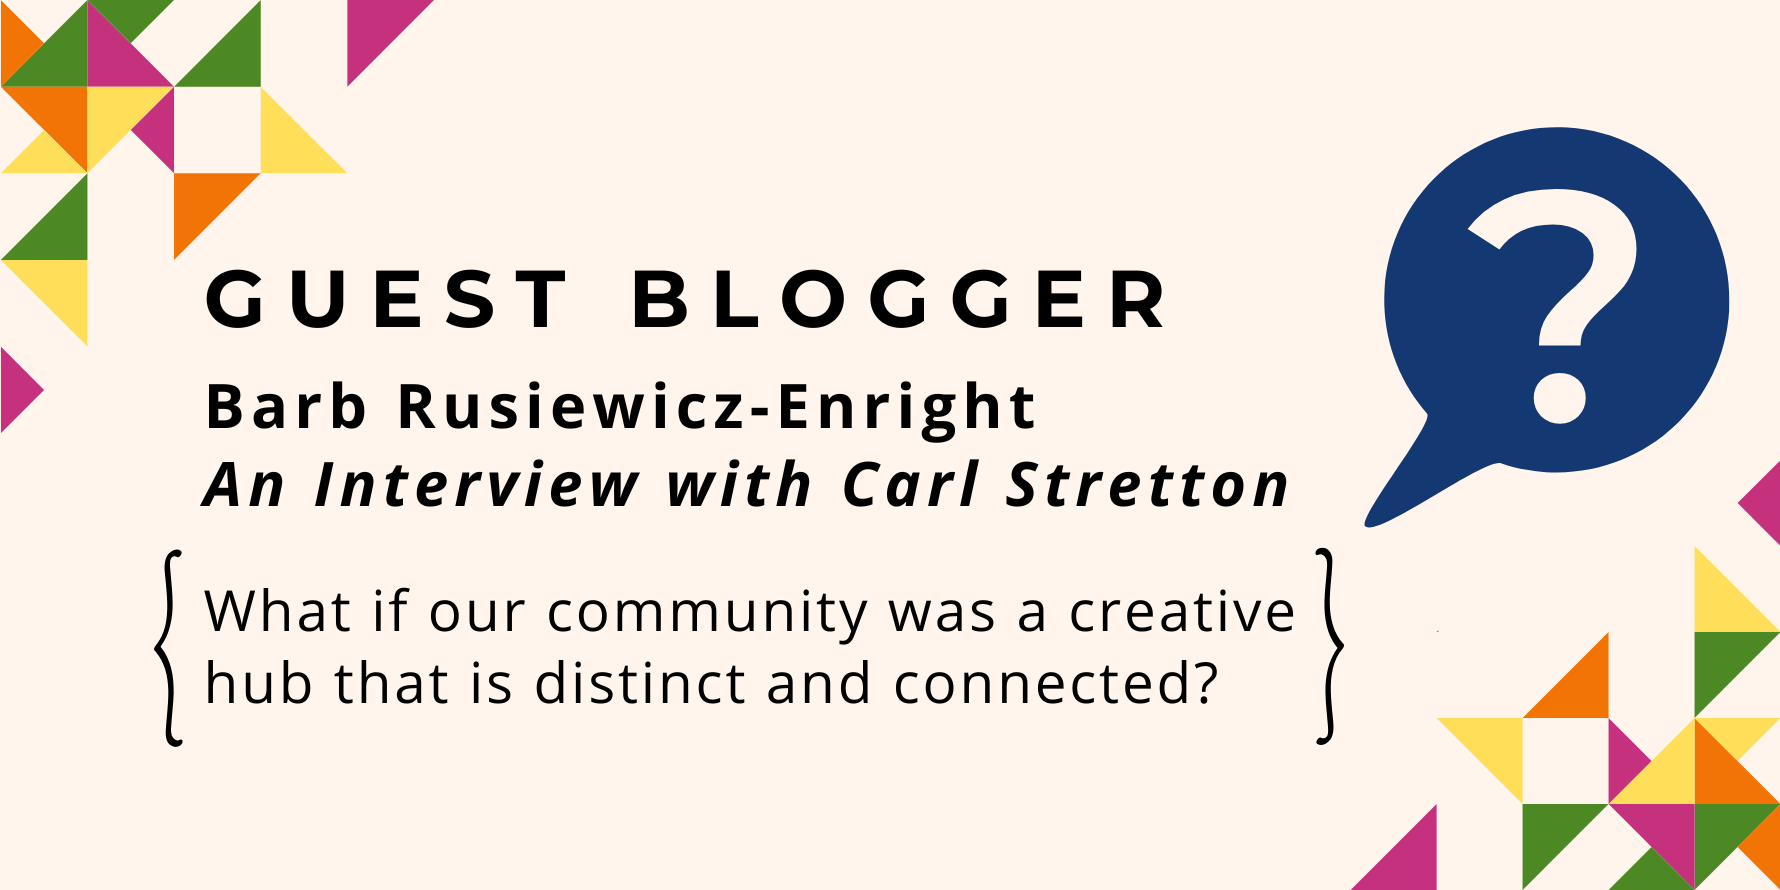 Guest Blogger: Barb Rusiewicz-Enright An Interview with Carl Stretton. What if our community was a creative Hub that is distinct and connected?